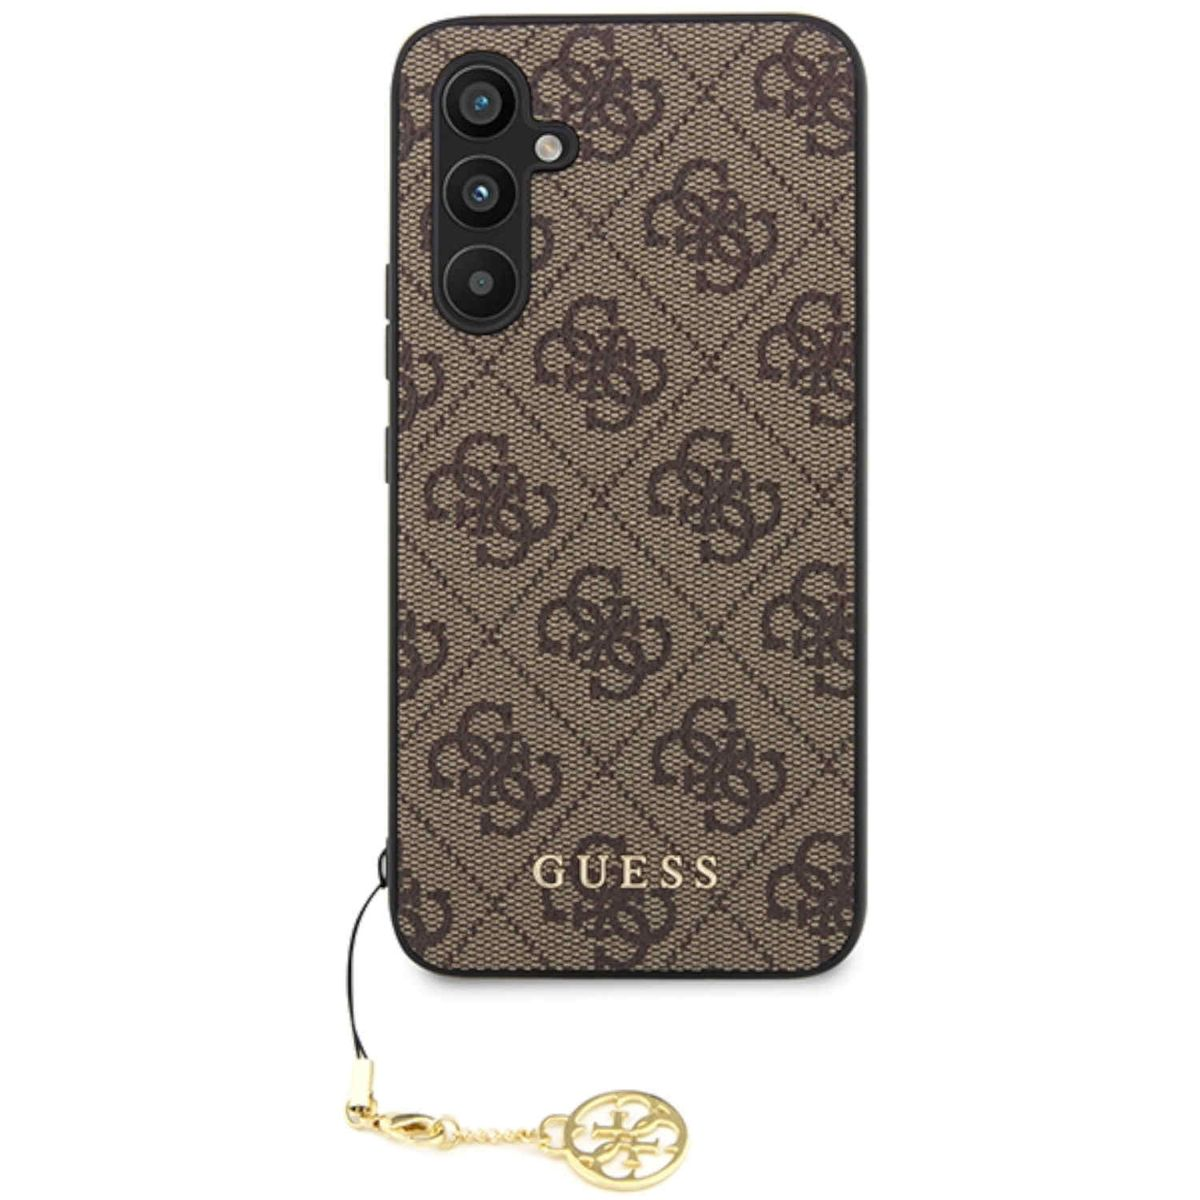 Galaxy Braun Cover, Full Charms GUESS Samsung, A54, Hülle, Design 4G Collection Chain